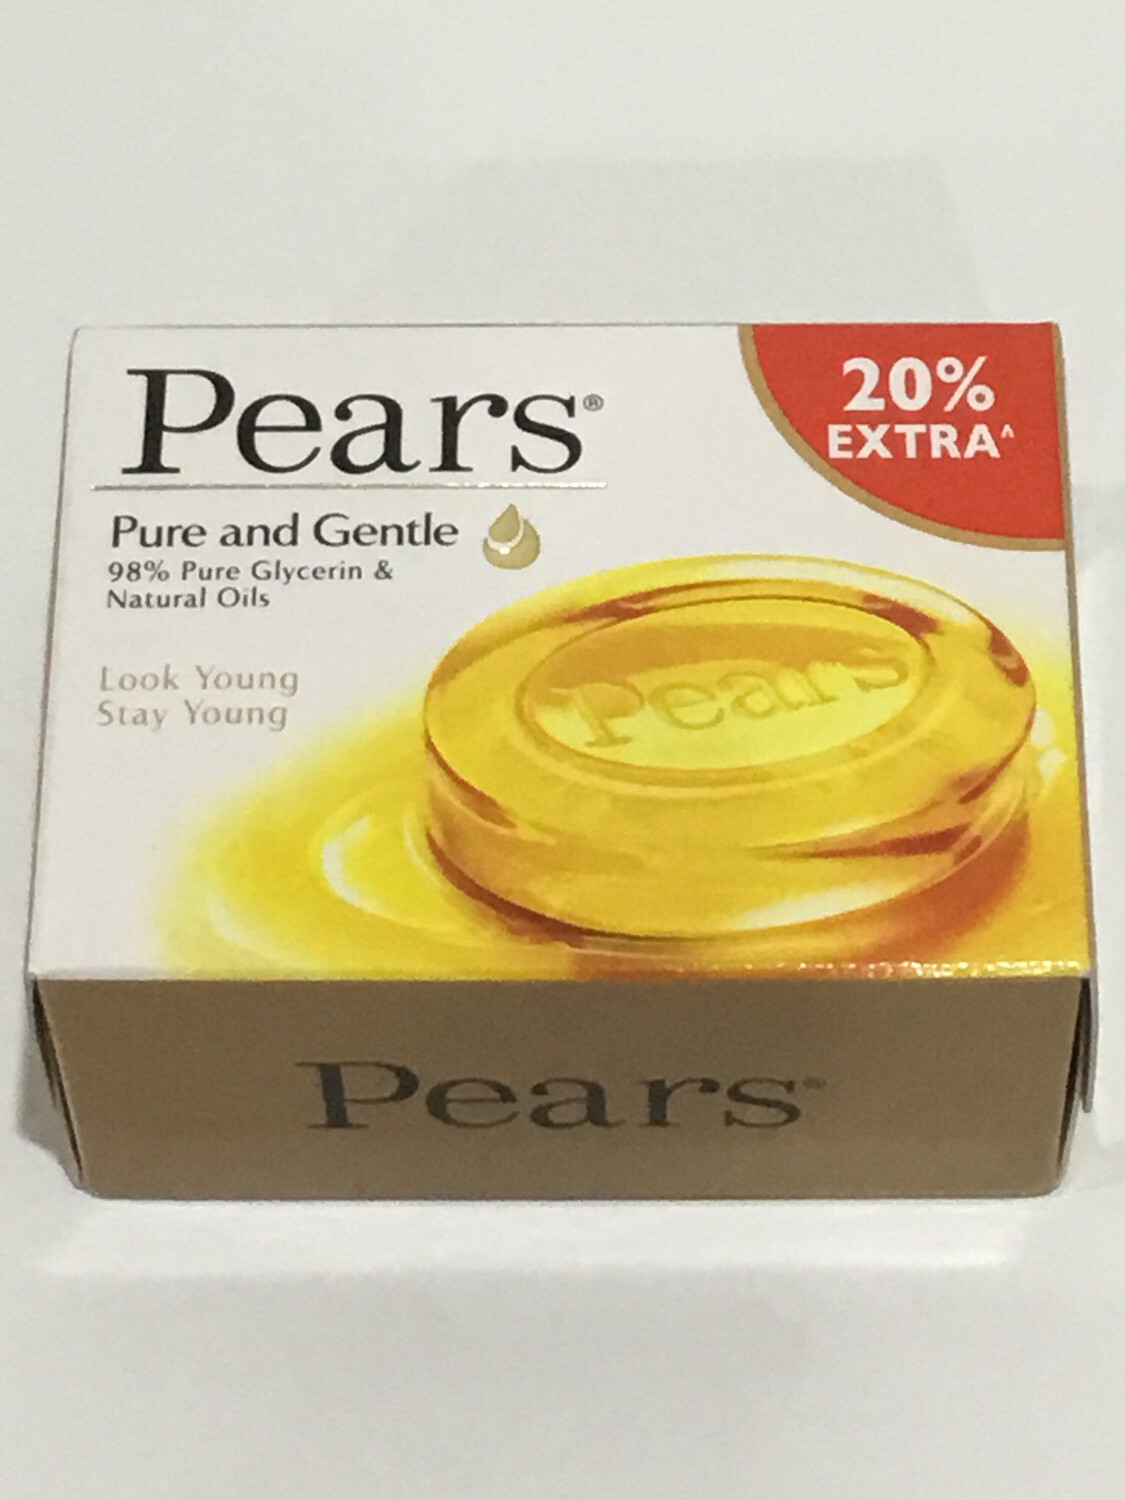 PEARS SOAP 125G + 20% extra